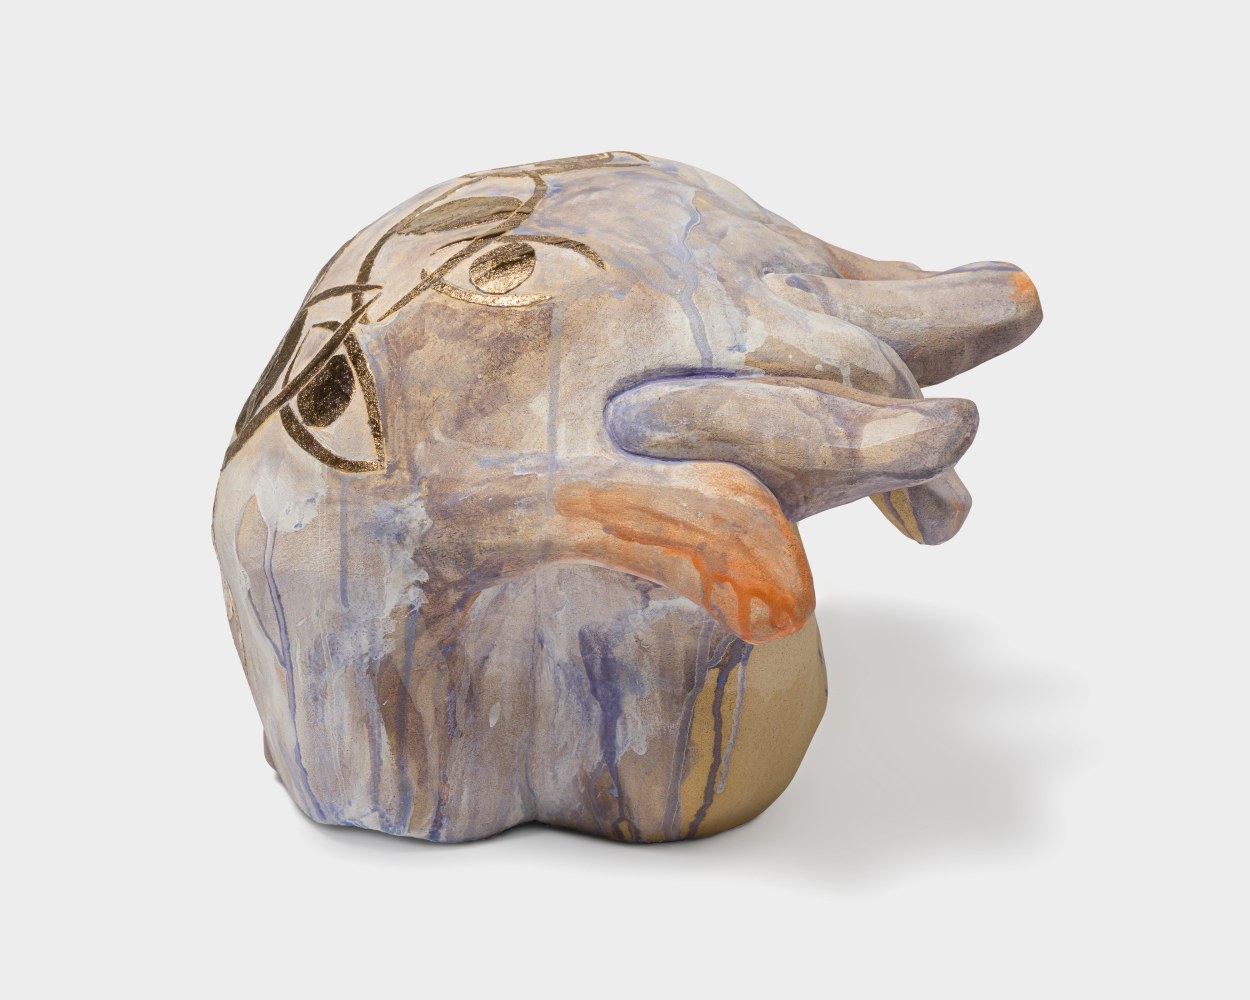 A ceramic sculpture with interlocked hands covered in streaking blue and orange glaze with golden painted eyes on the back of the hands.